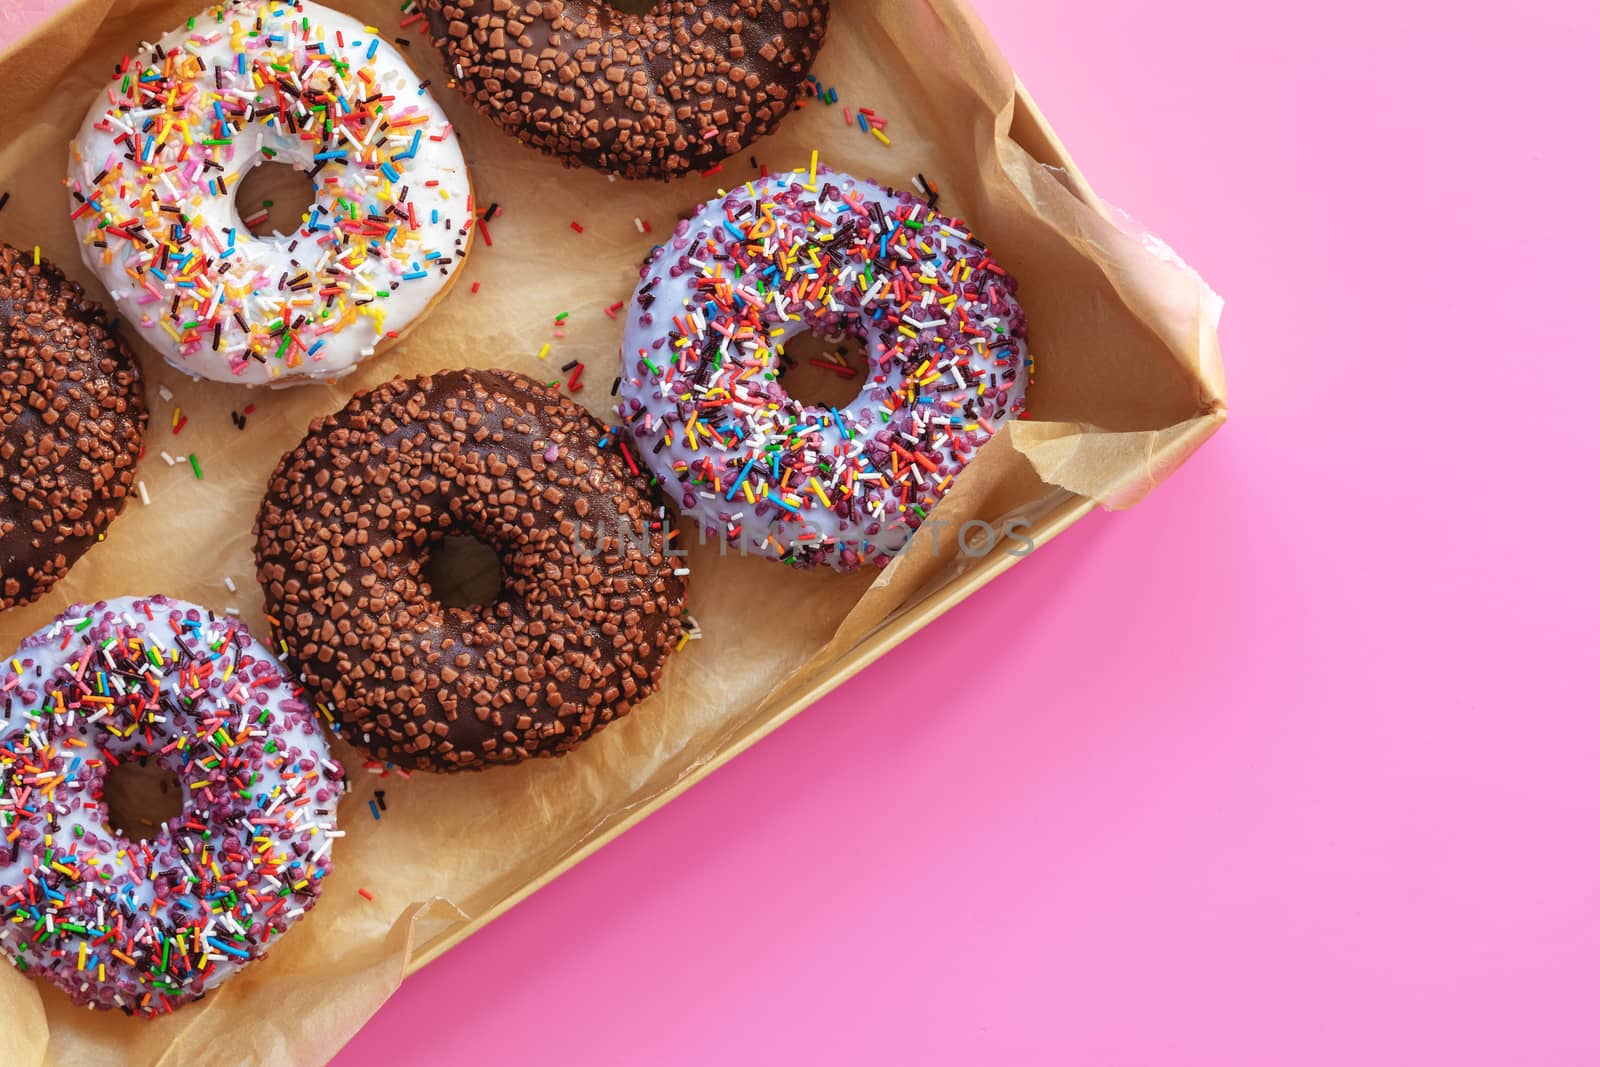 Delicious glazed donuts in box on pink surface. Flat lay minimalist food art background. Top view.